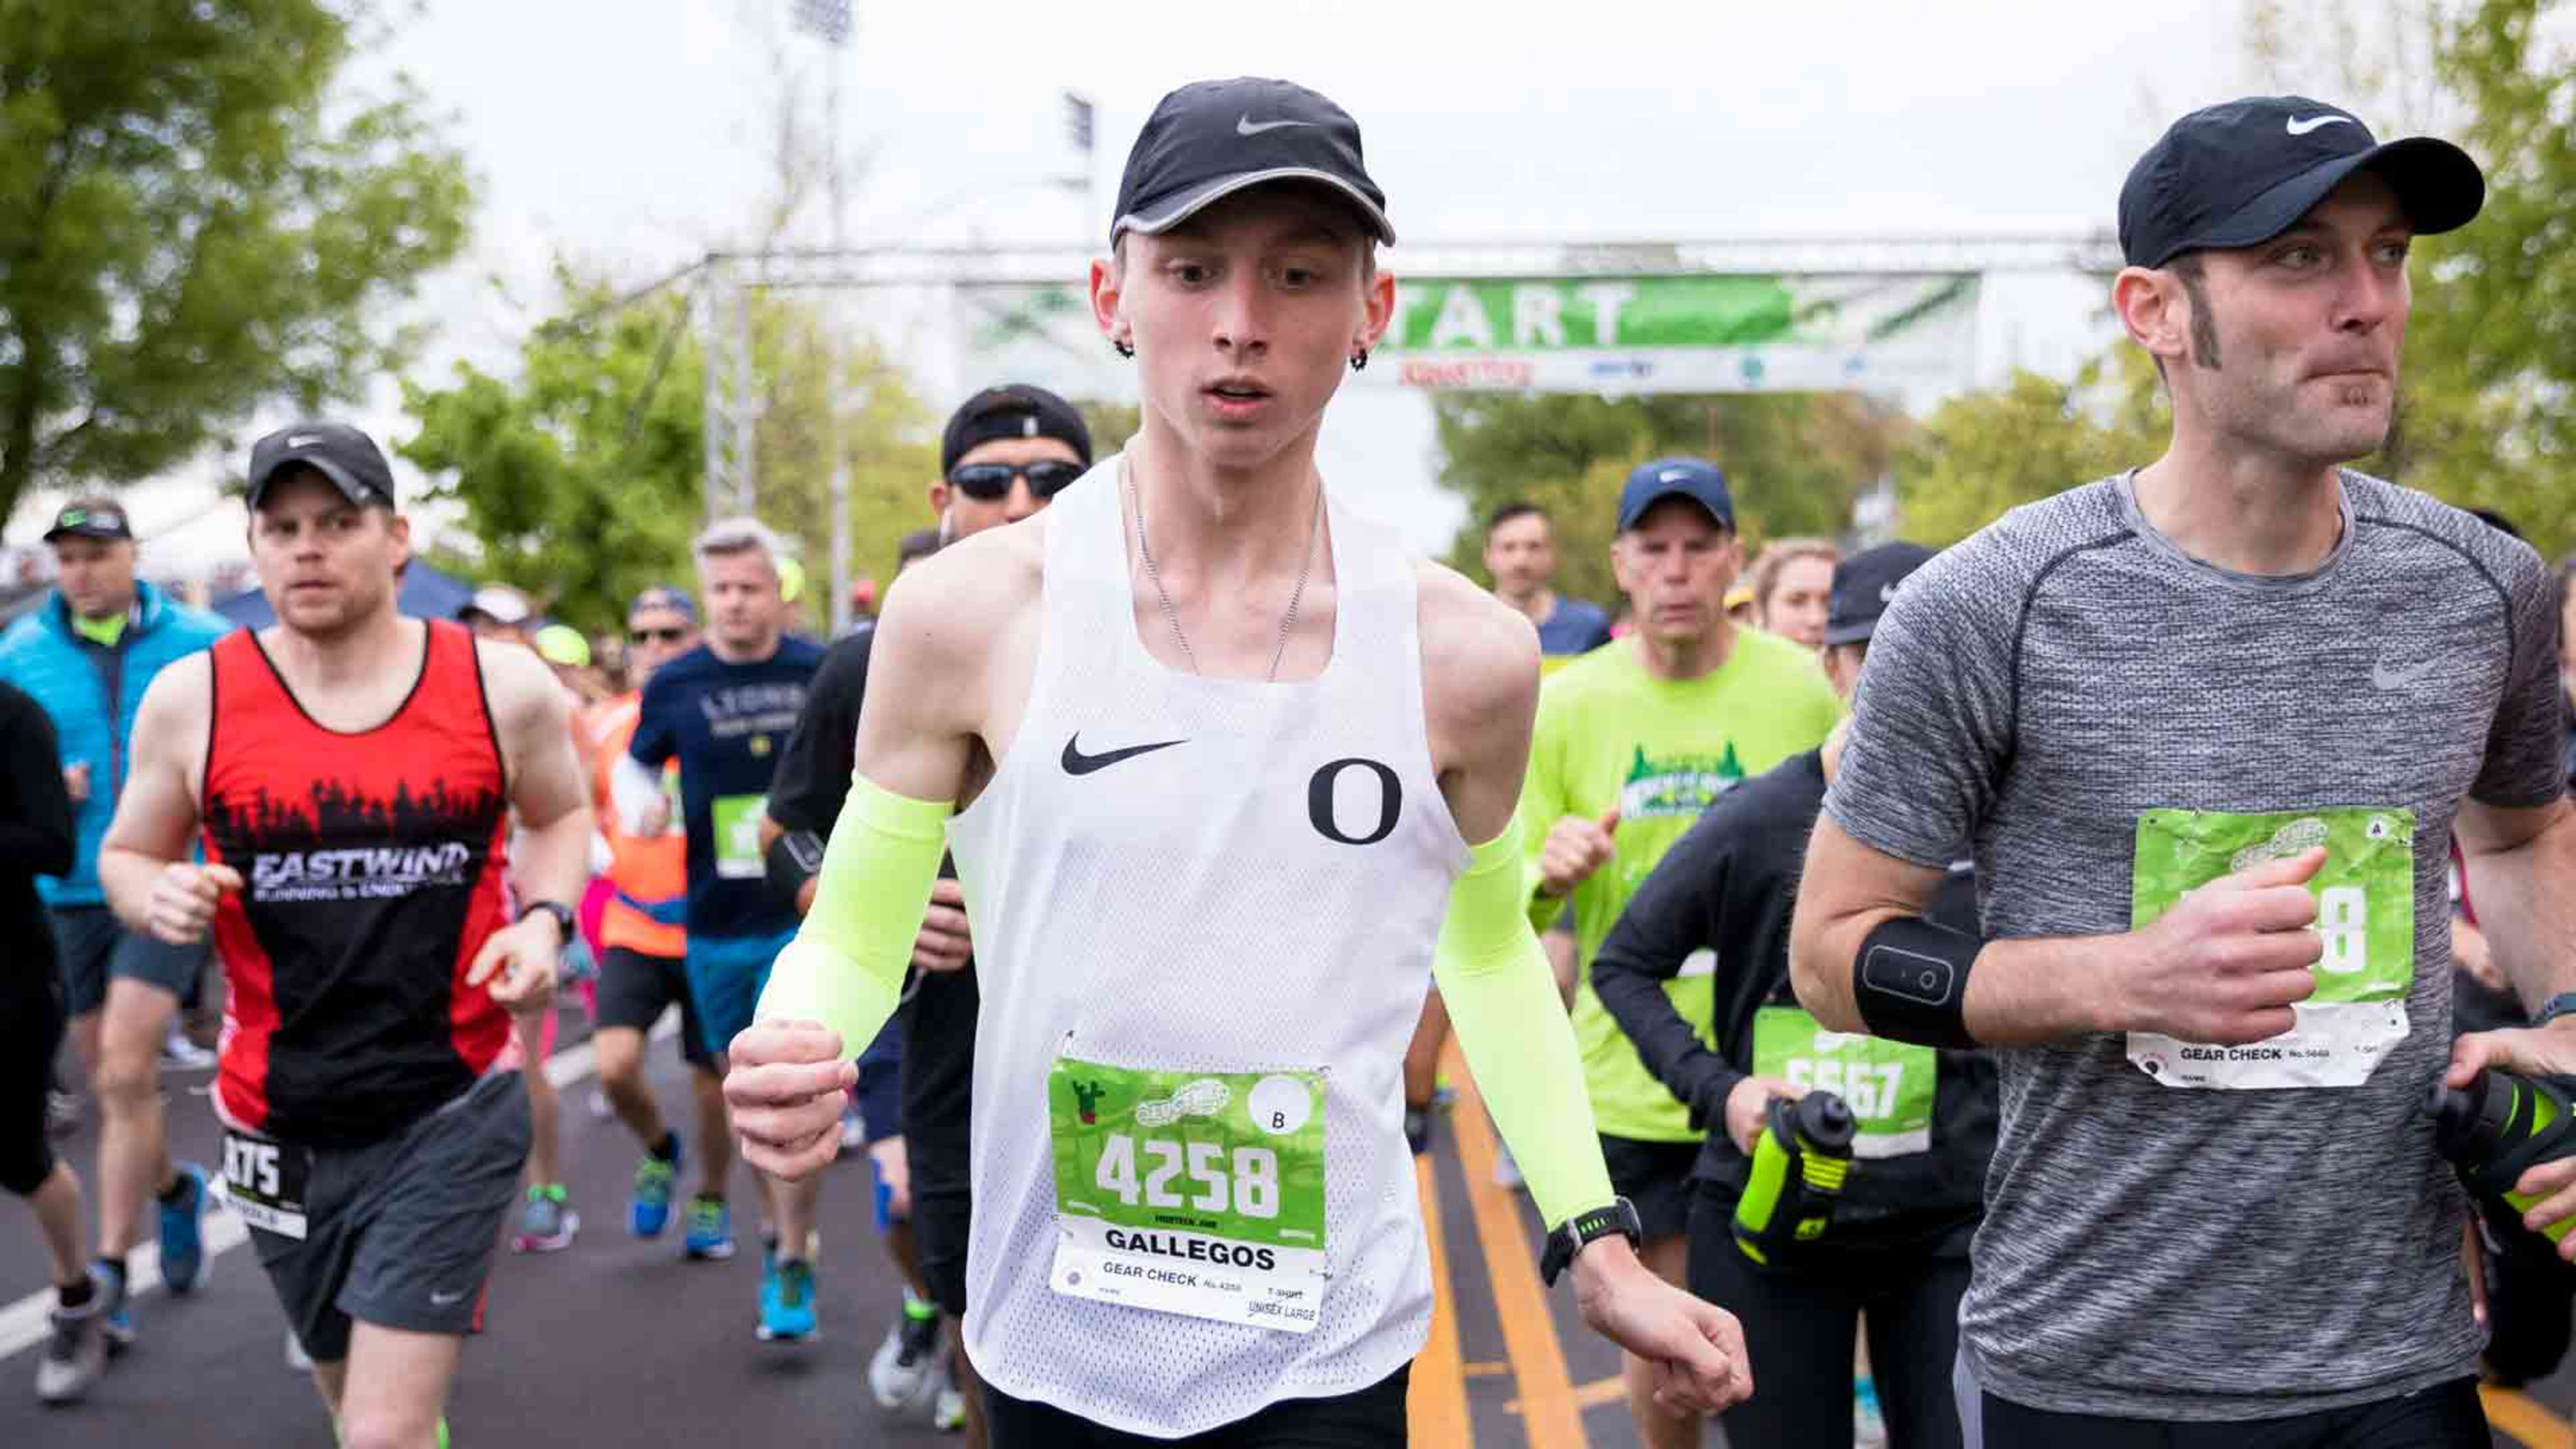 This Marathoner With Cerebral Palsy Just Got The Nike Hookup